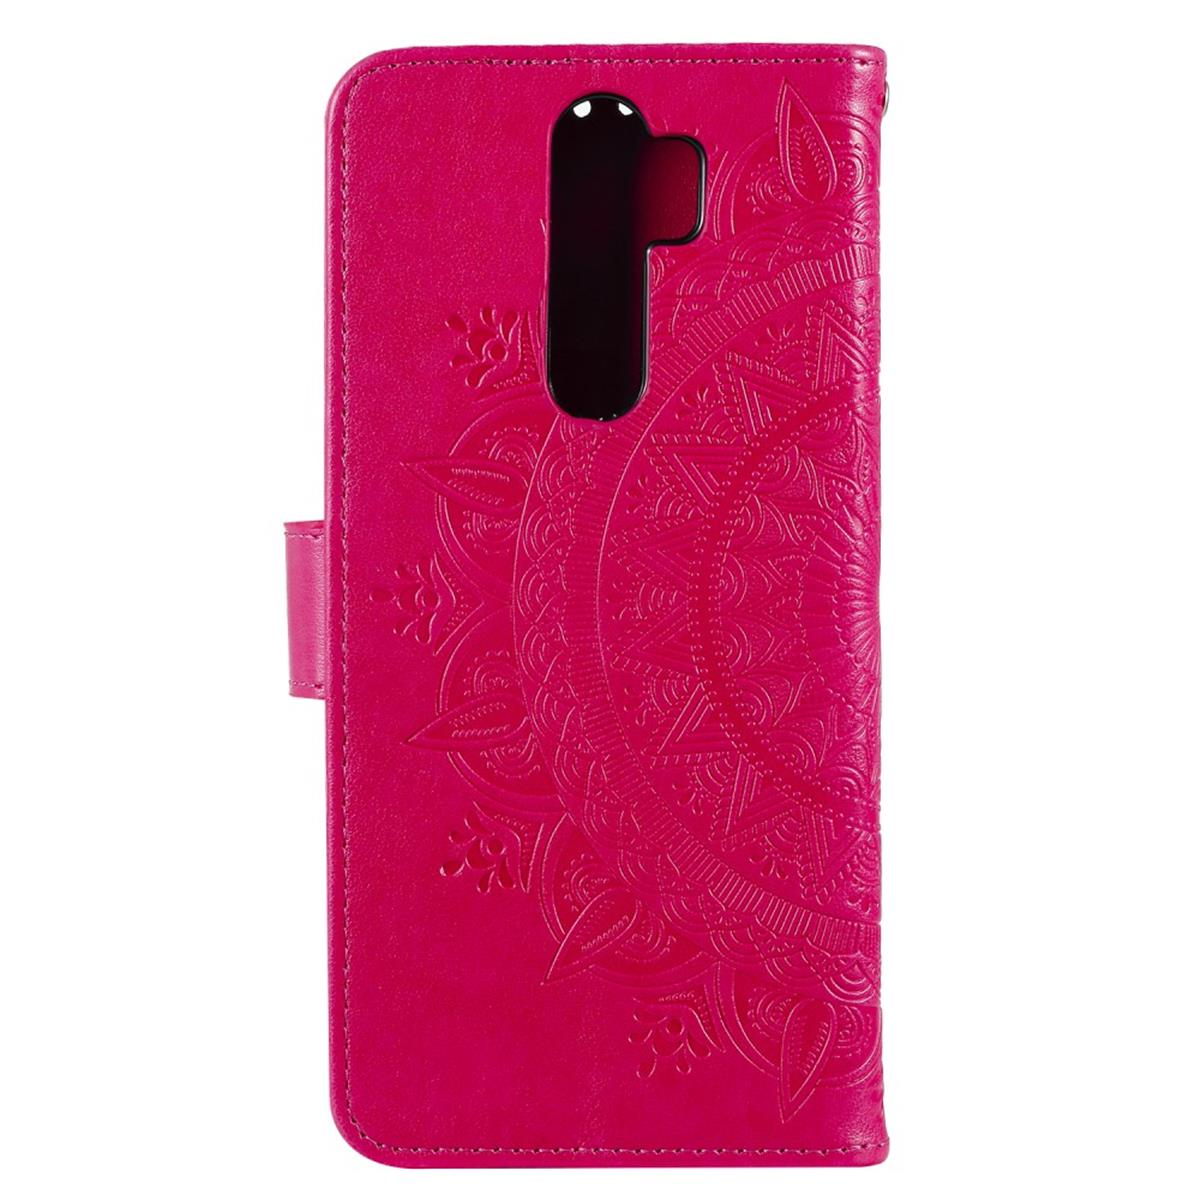 8 Mandala Klapphülle COVERKINGZ Pro, Pink OnePlus, Bookcover, Muster, mit